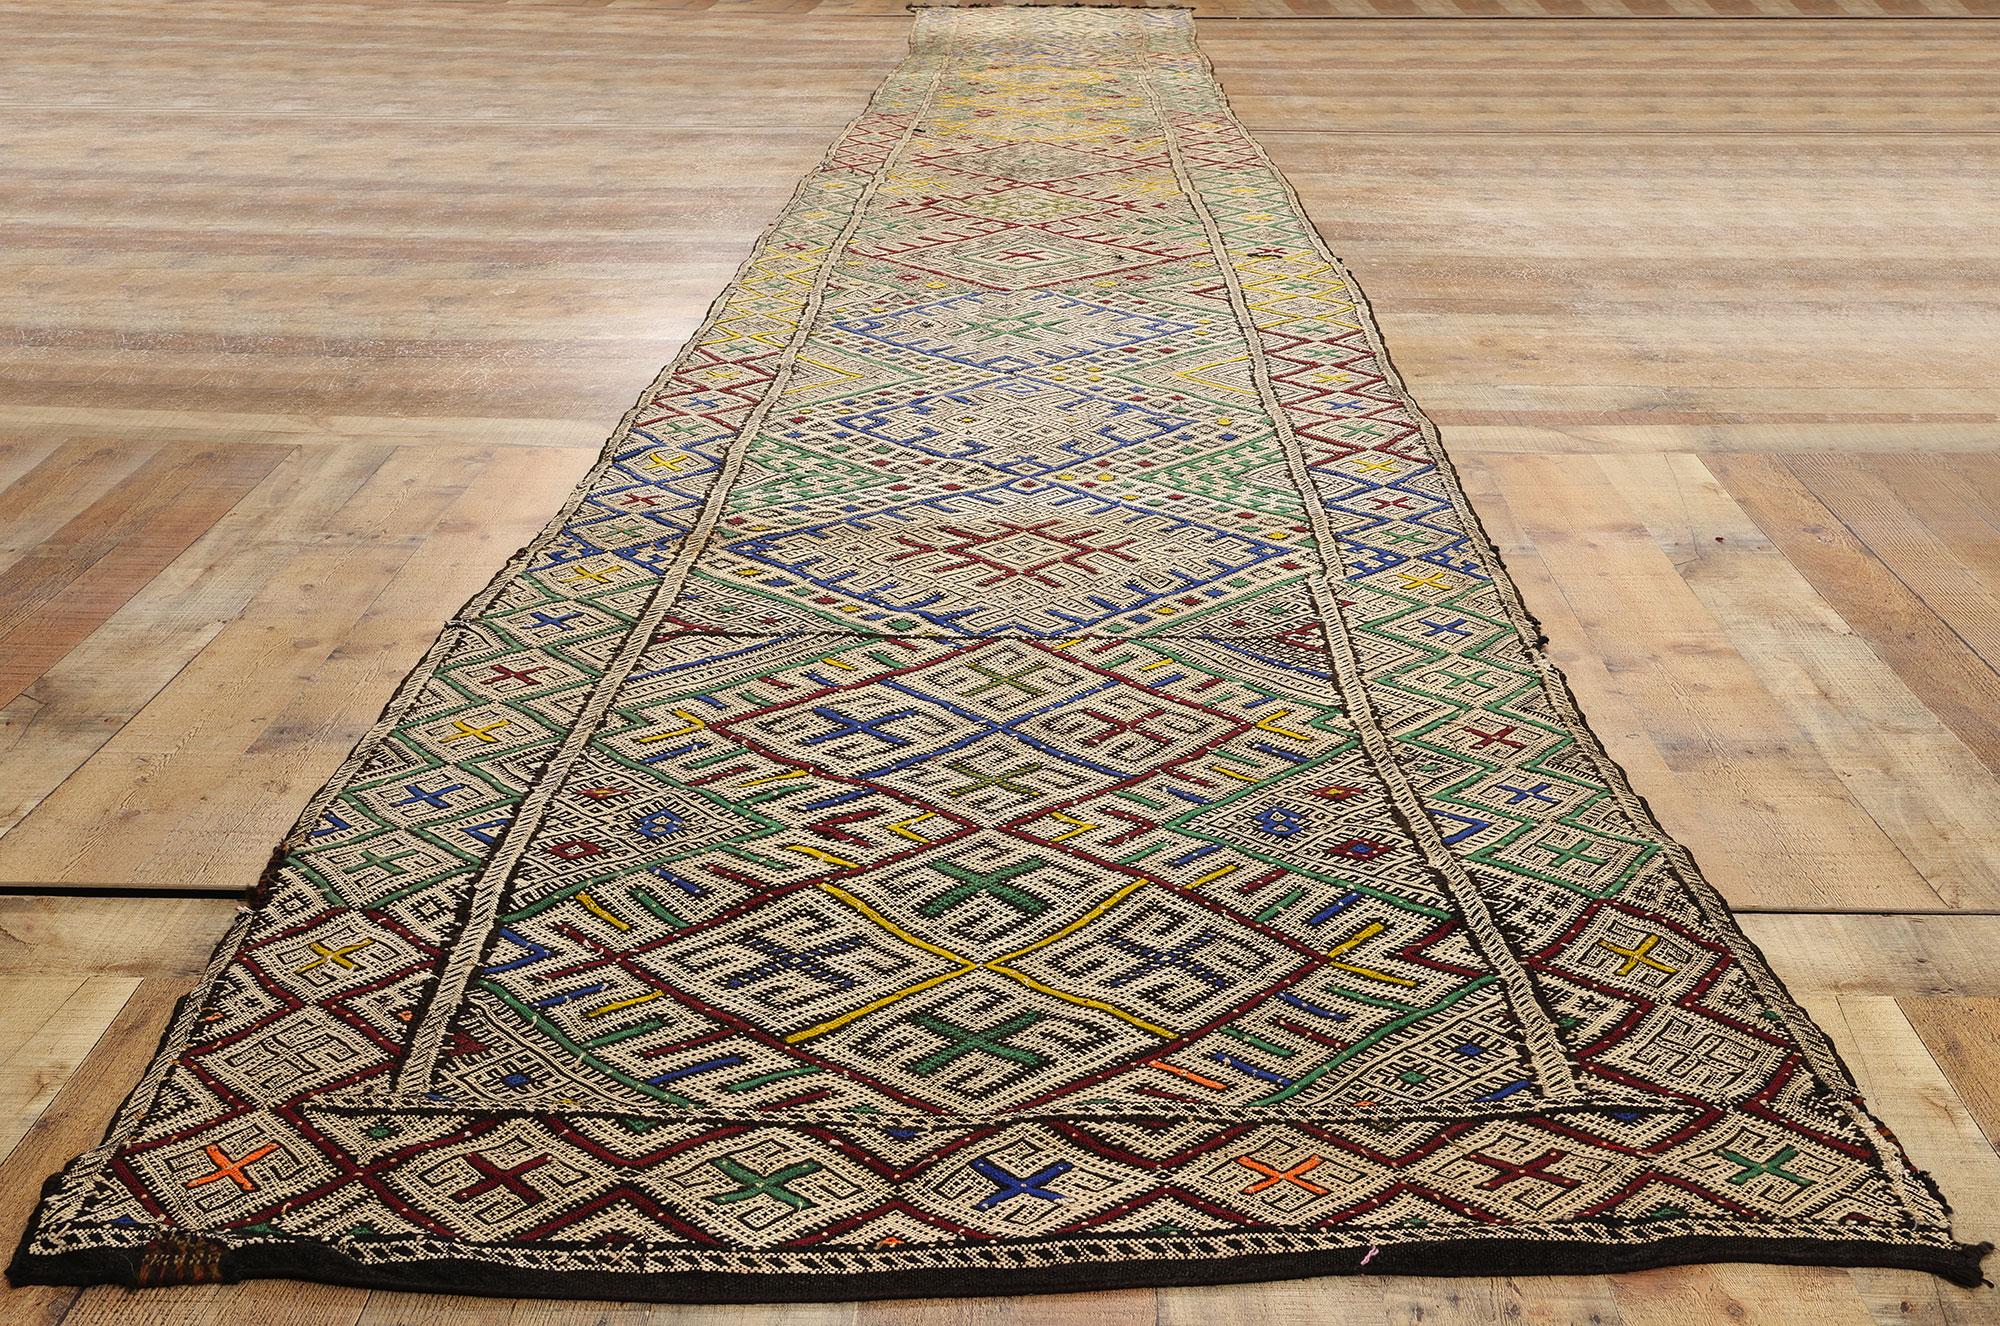 Midcentury Bohemian Vintage Moroccan Zemmour Kilim Berber Rug, 03'05 x 22'04 In Good Condition For Sale In Dallas, TX